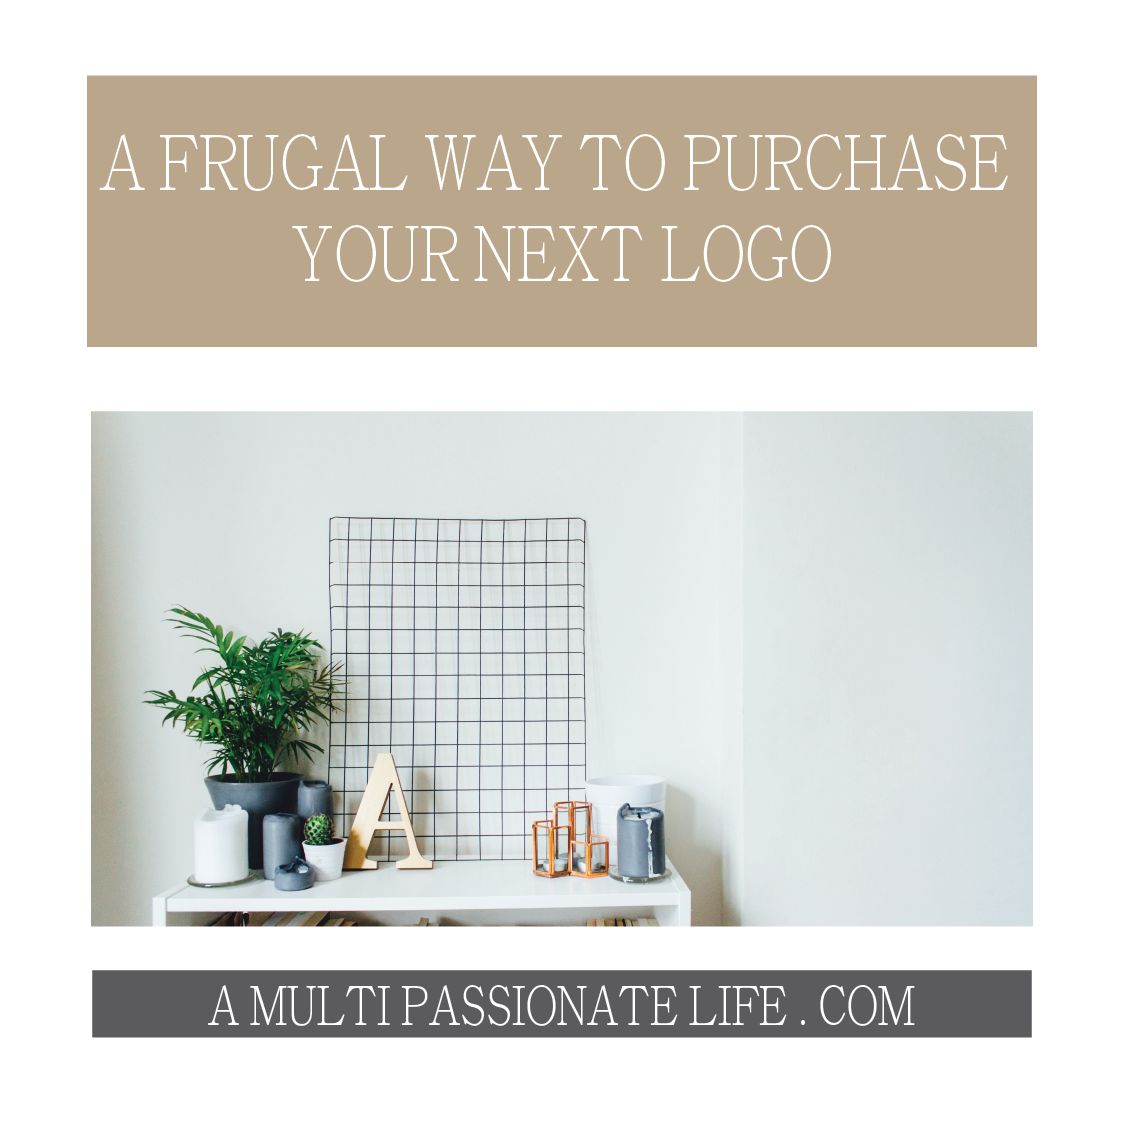 A FRUGAL WAY TO PURCHASING YOUR NEXT LOGO